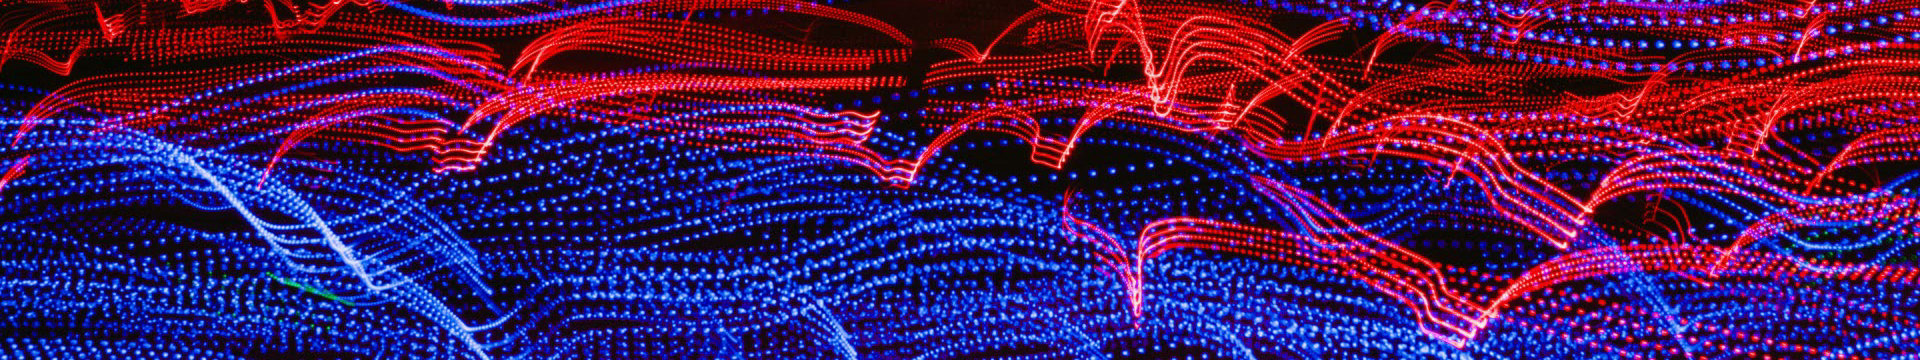 Abstract LED curves